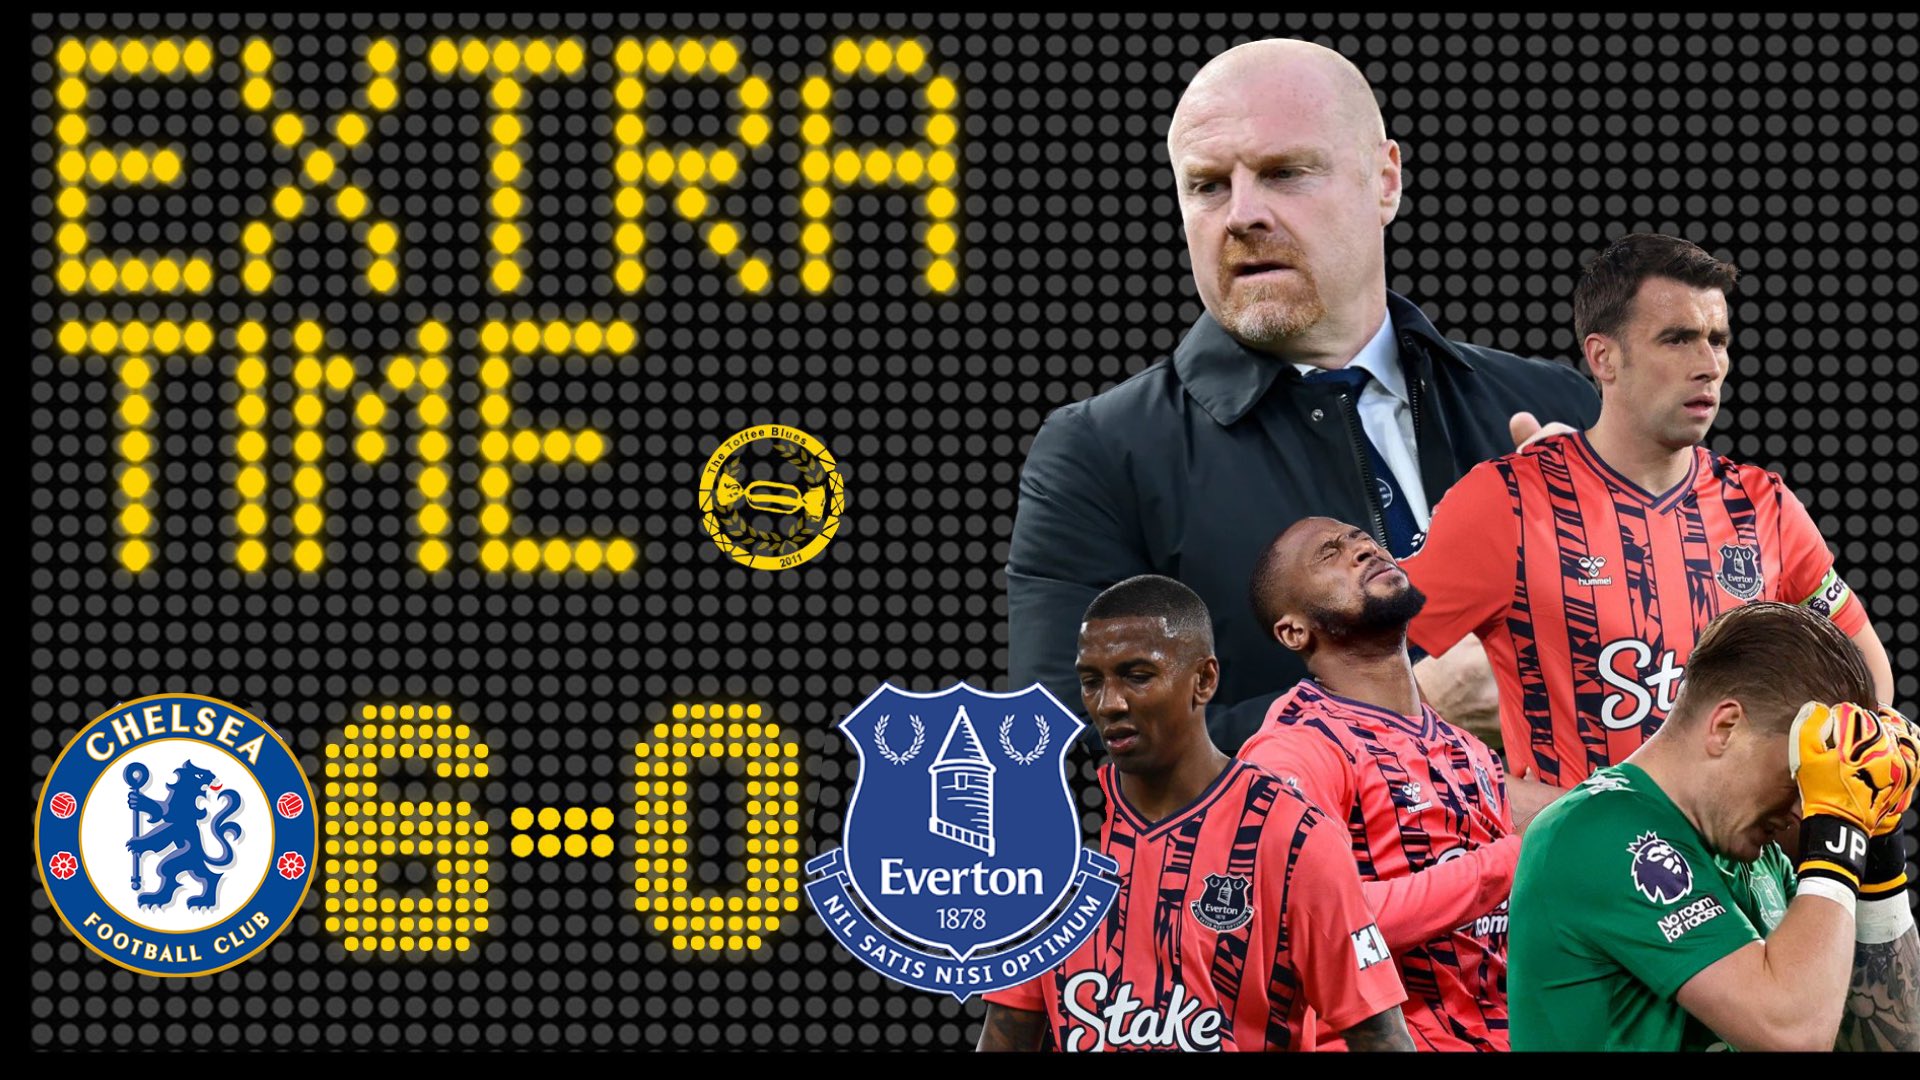 Has Dyche Lost The Dressing Room? | Chelsea 6-0 Everton | Extra Time Match Review